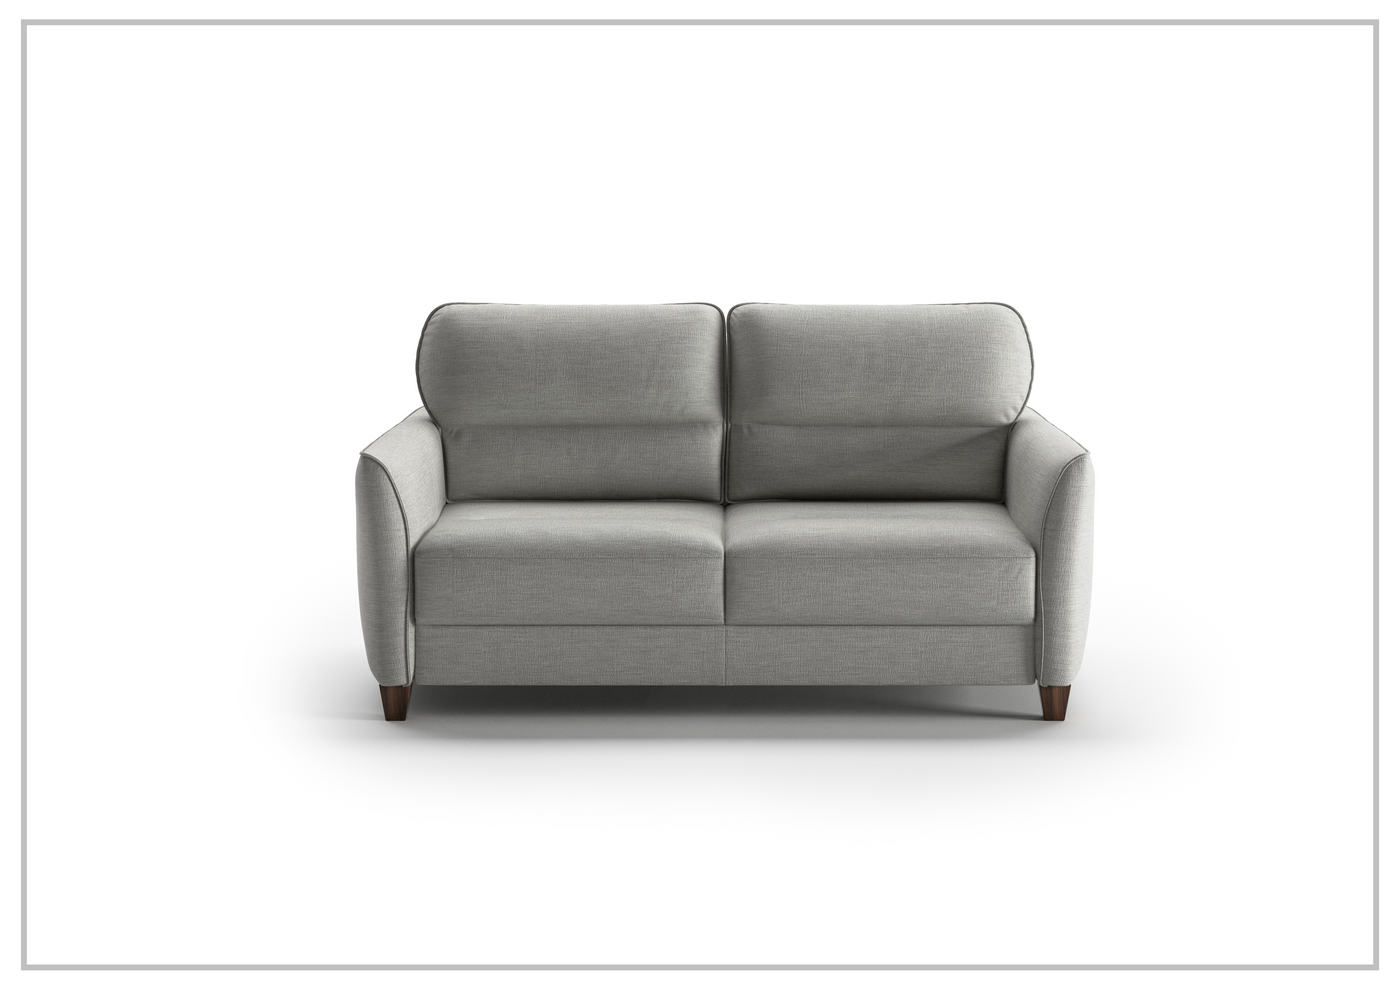 Luonto Harold Fabric Sofa Sleeper with Back and Neck Support